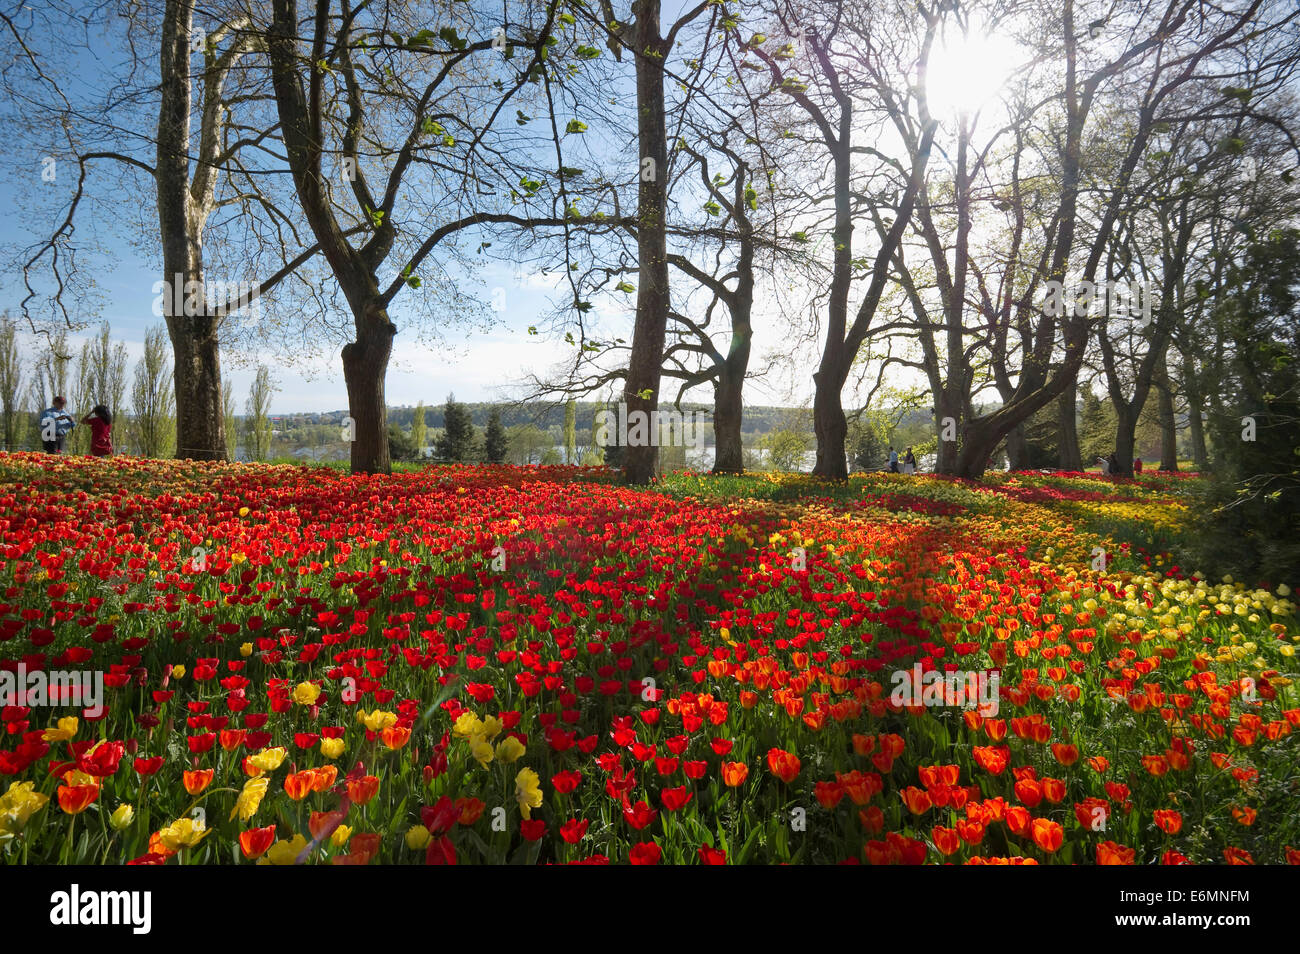 Colourful spring meadow with daffodils and tulips, Mainau, Baden-Württemberg, Germany Stock Photo